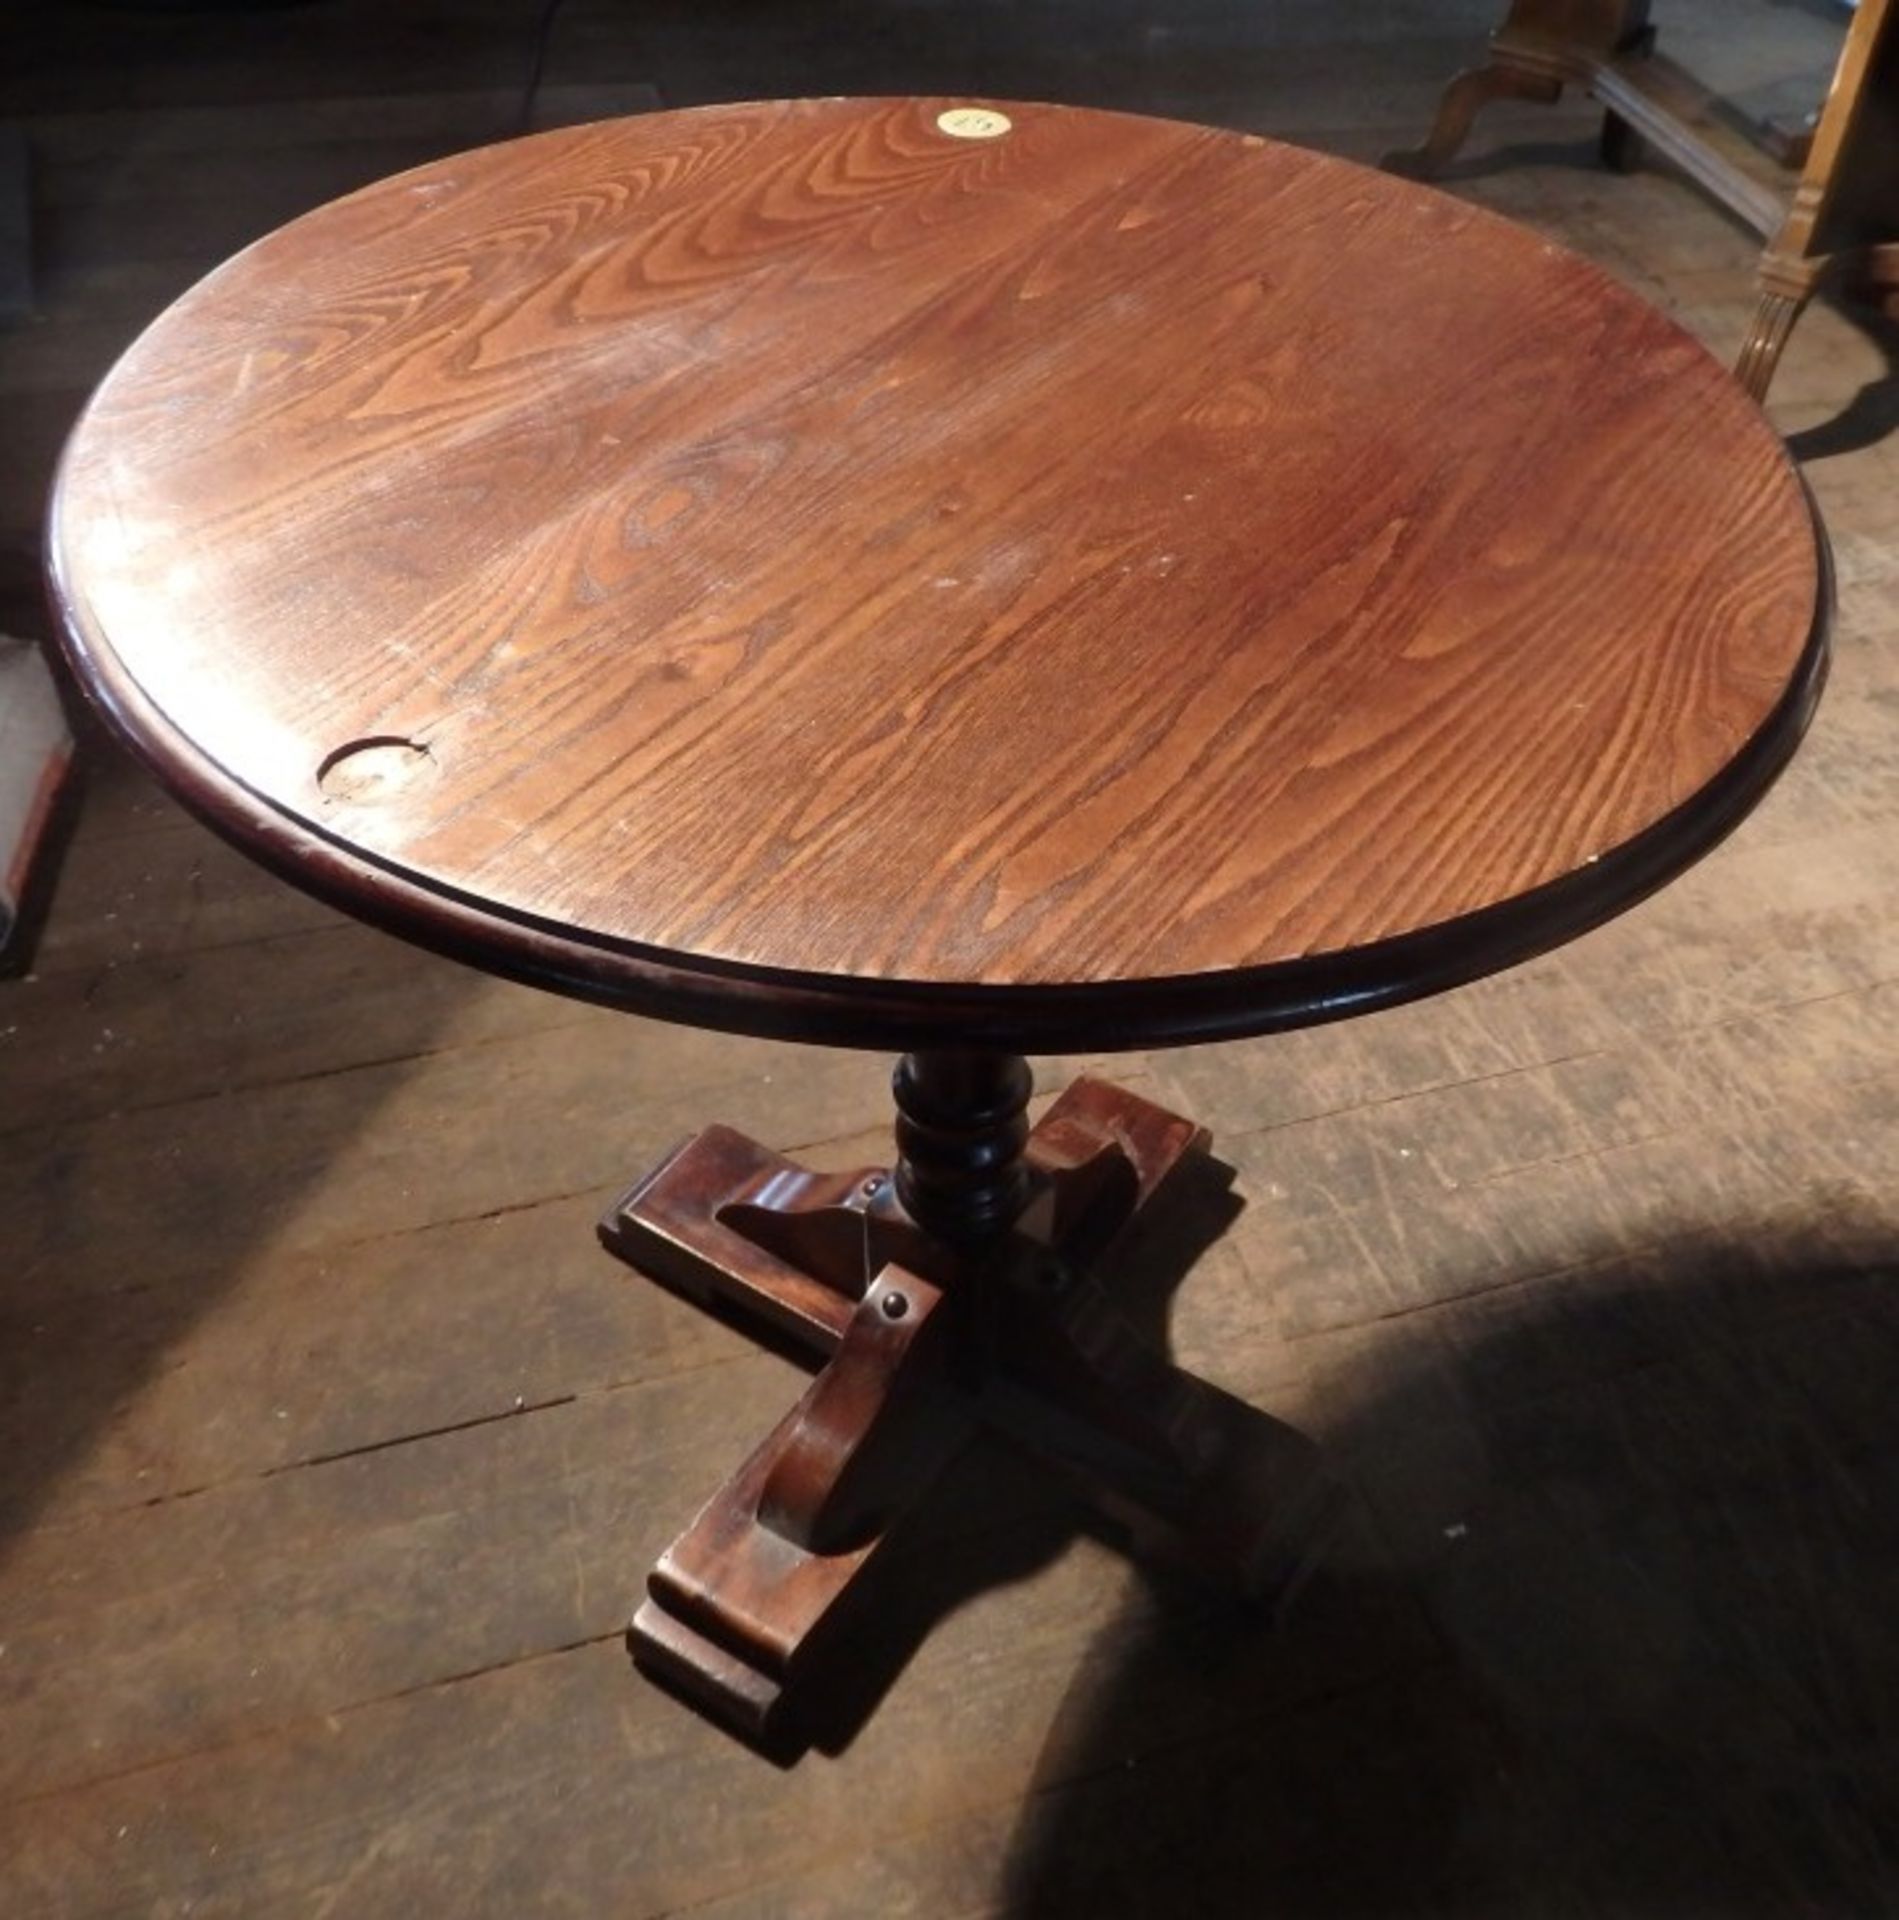 1 x Round Solid Wood Bistro Table - Recently Taken From A Bar & Restaurant Environment - Dimensions: - Image 2 of 5